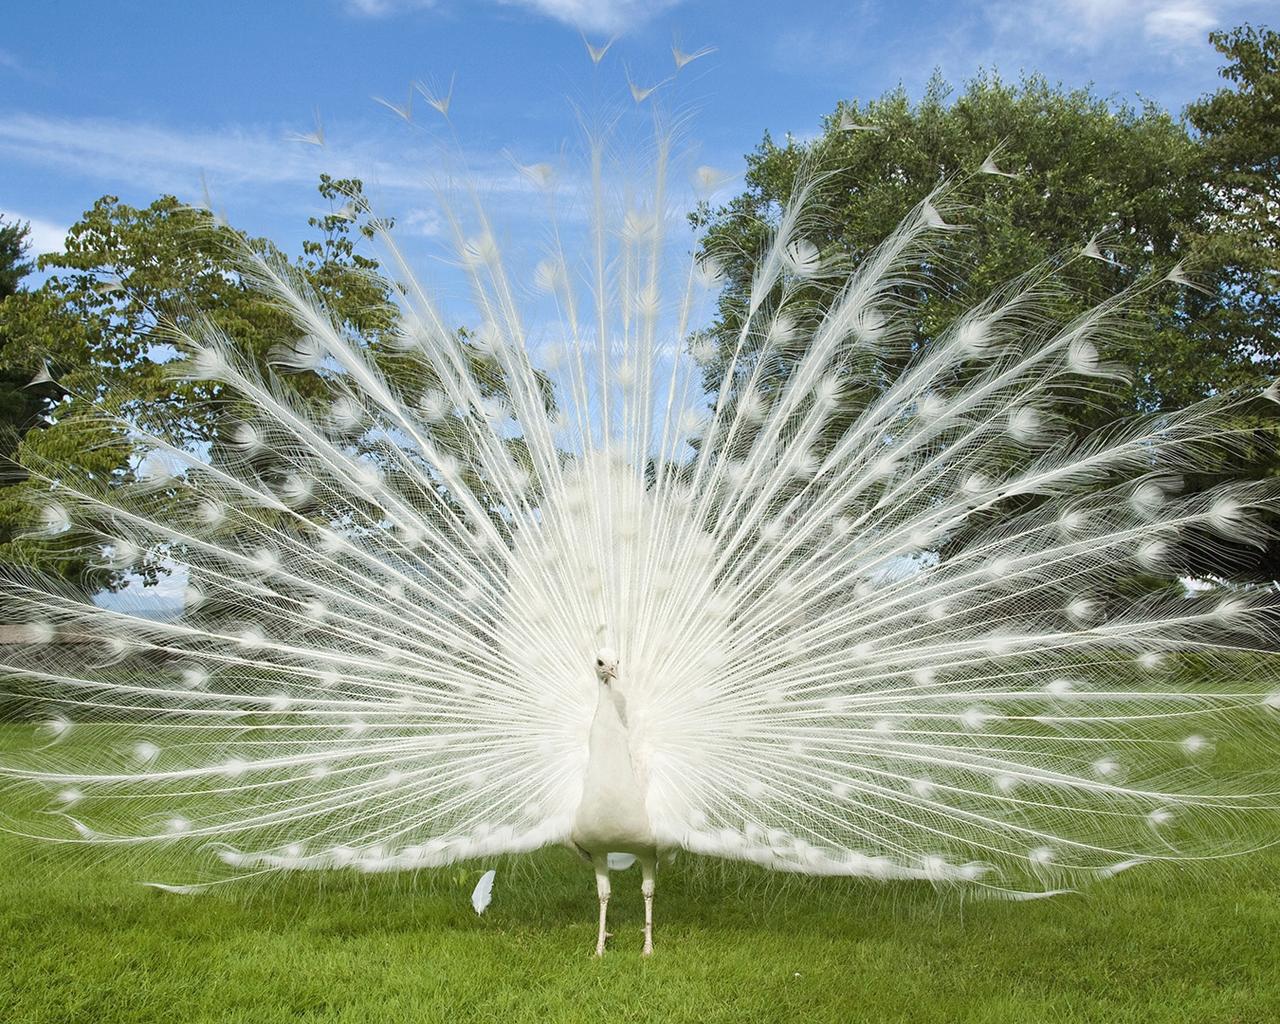 White peacock with large tail like a fan on the grass